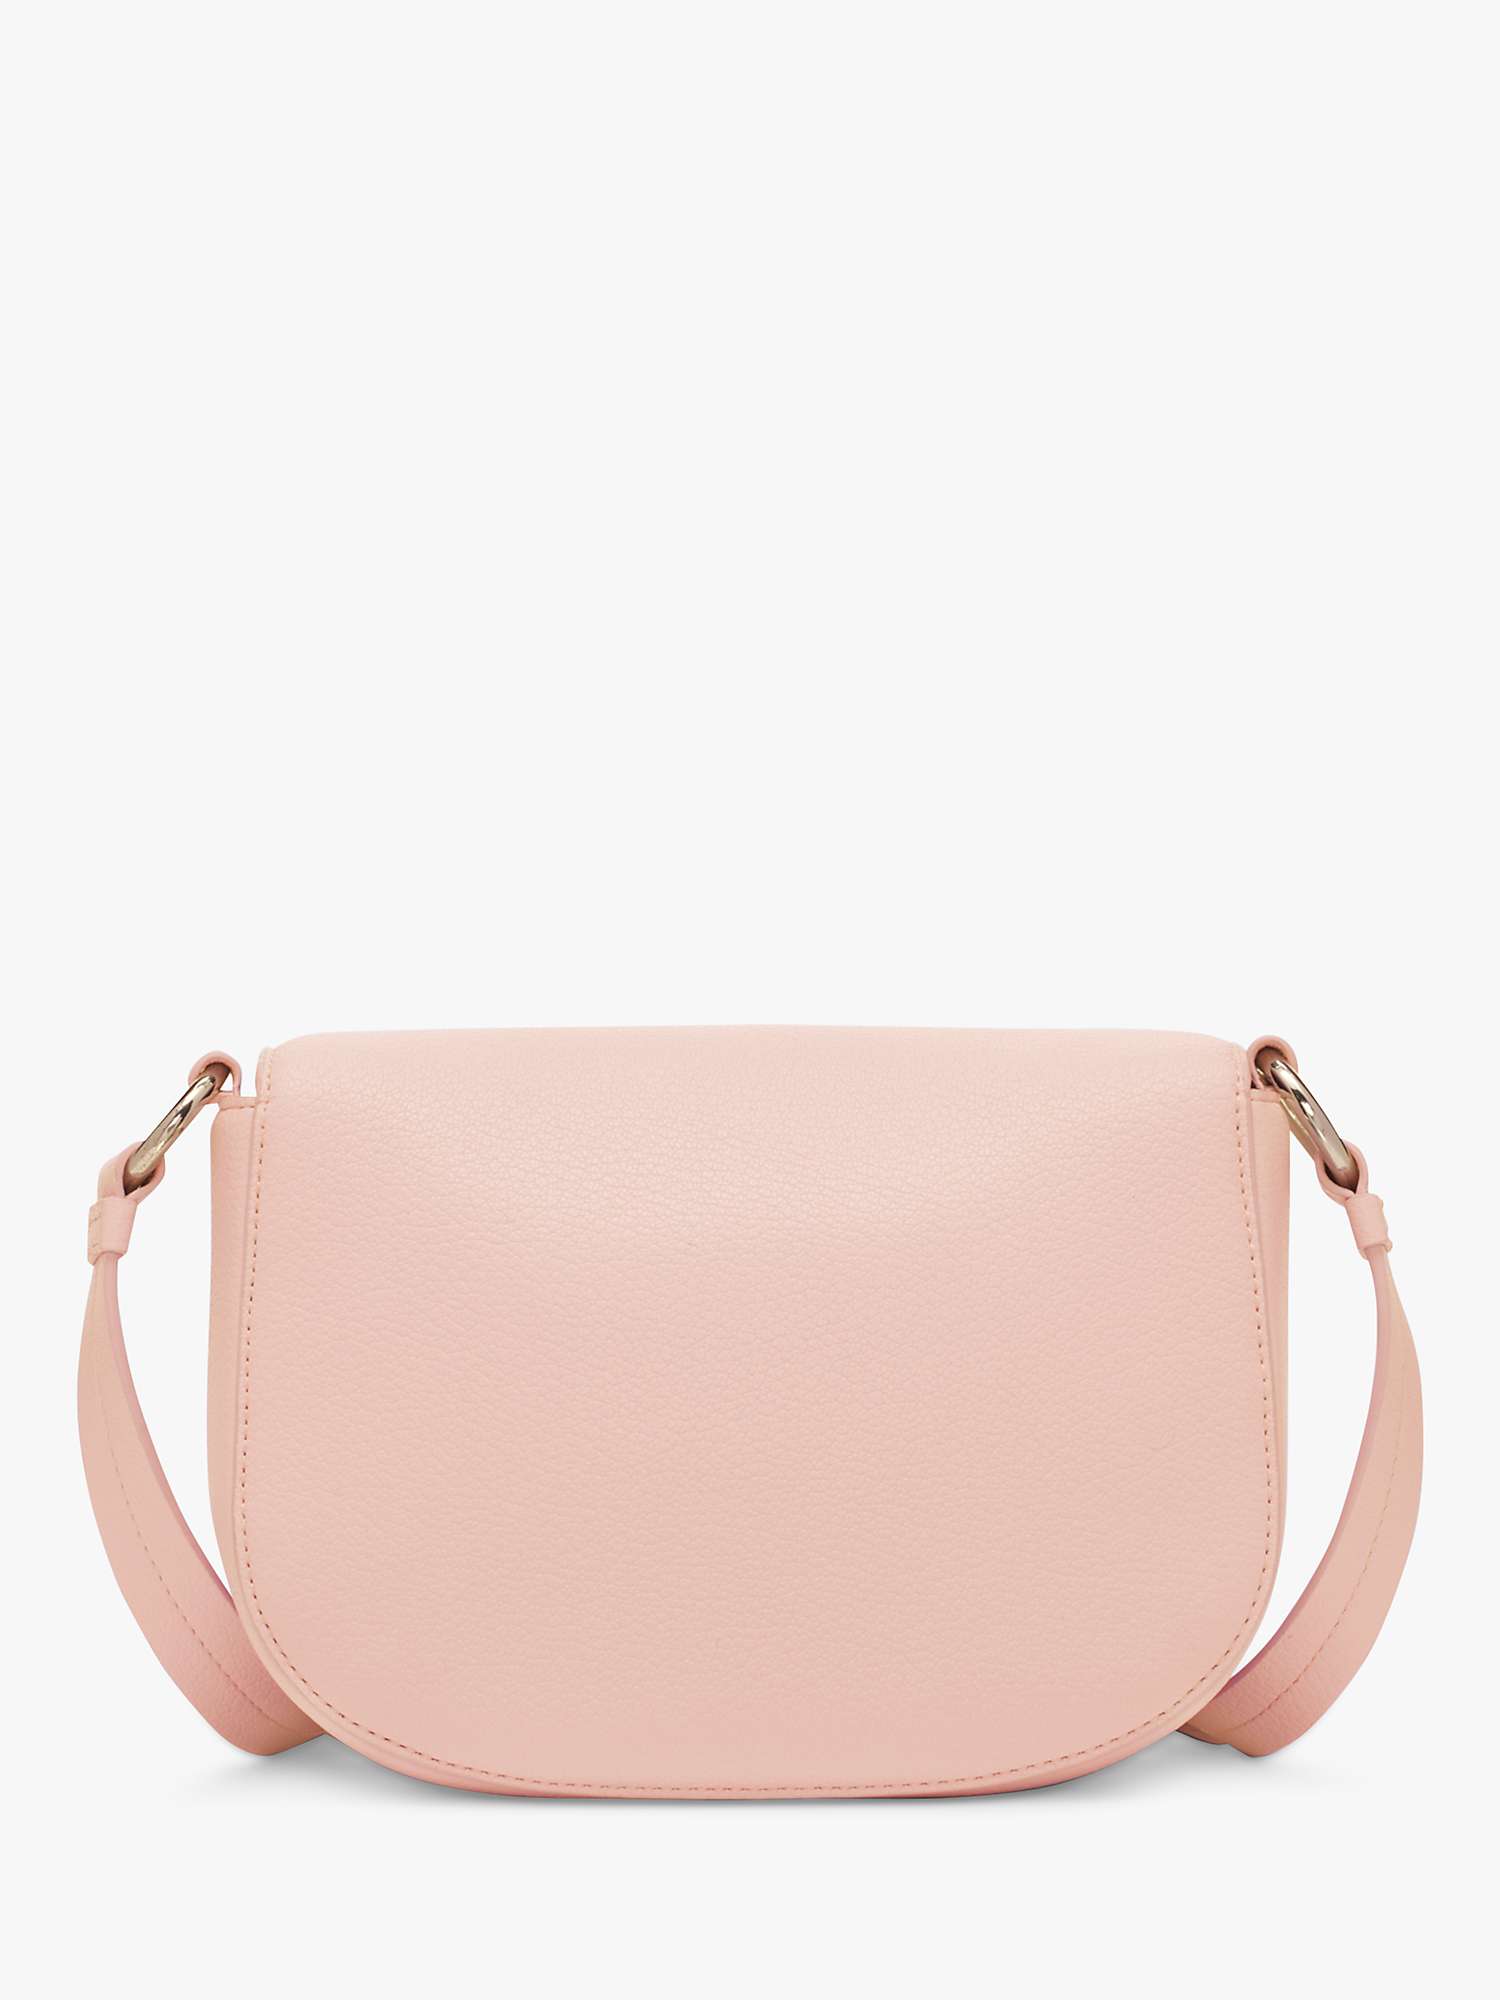 Buy DKNY Seventh Avenue Leather Small Flap Over Cross Body Bag Online at johnlewis.com